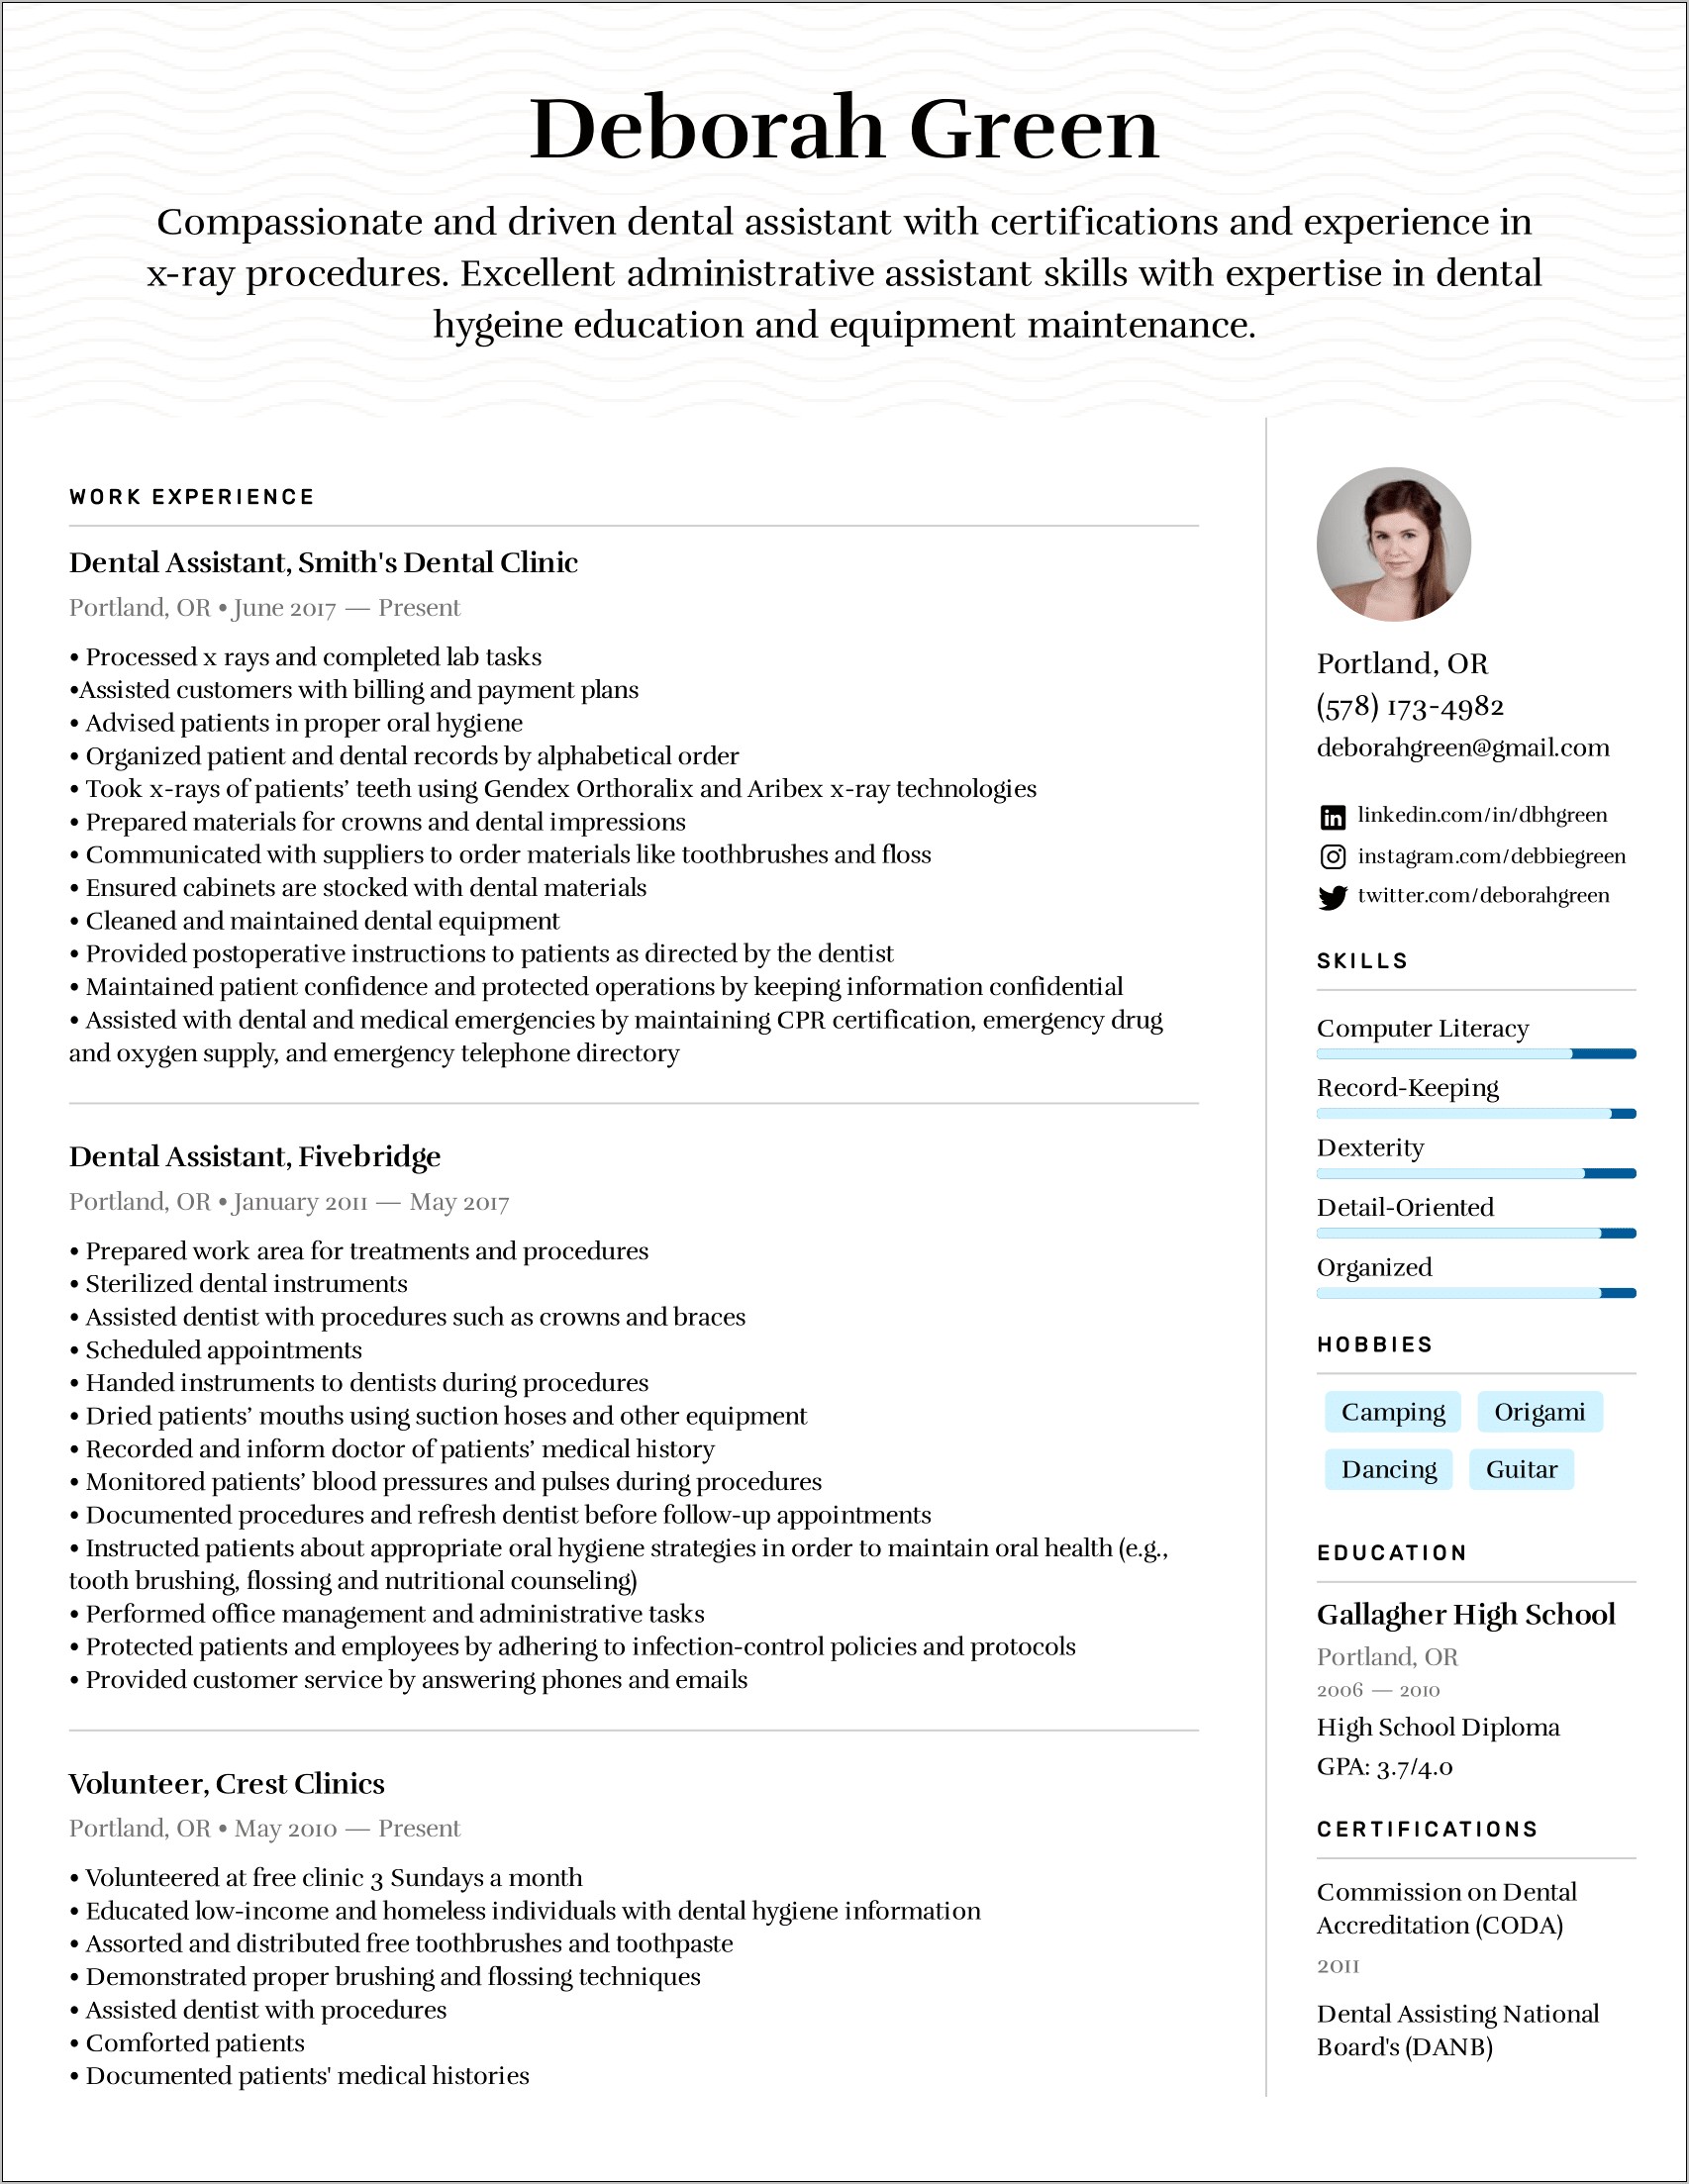 New Dental Assistant Objective For Resume